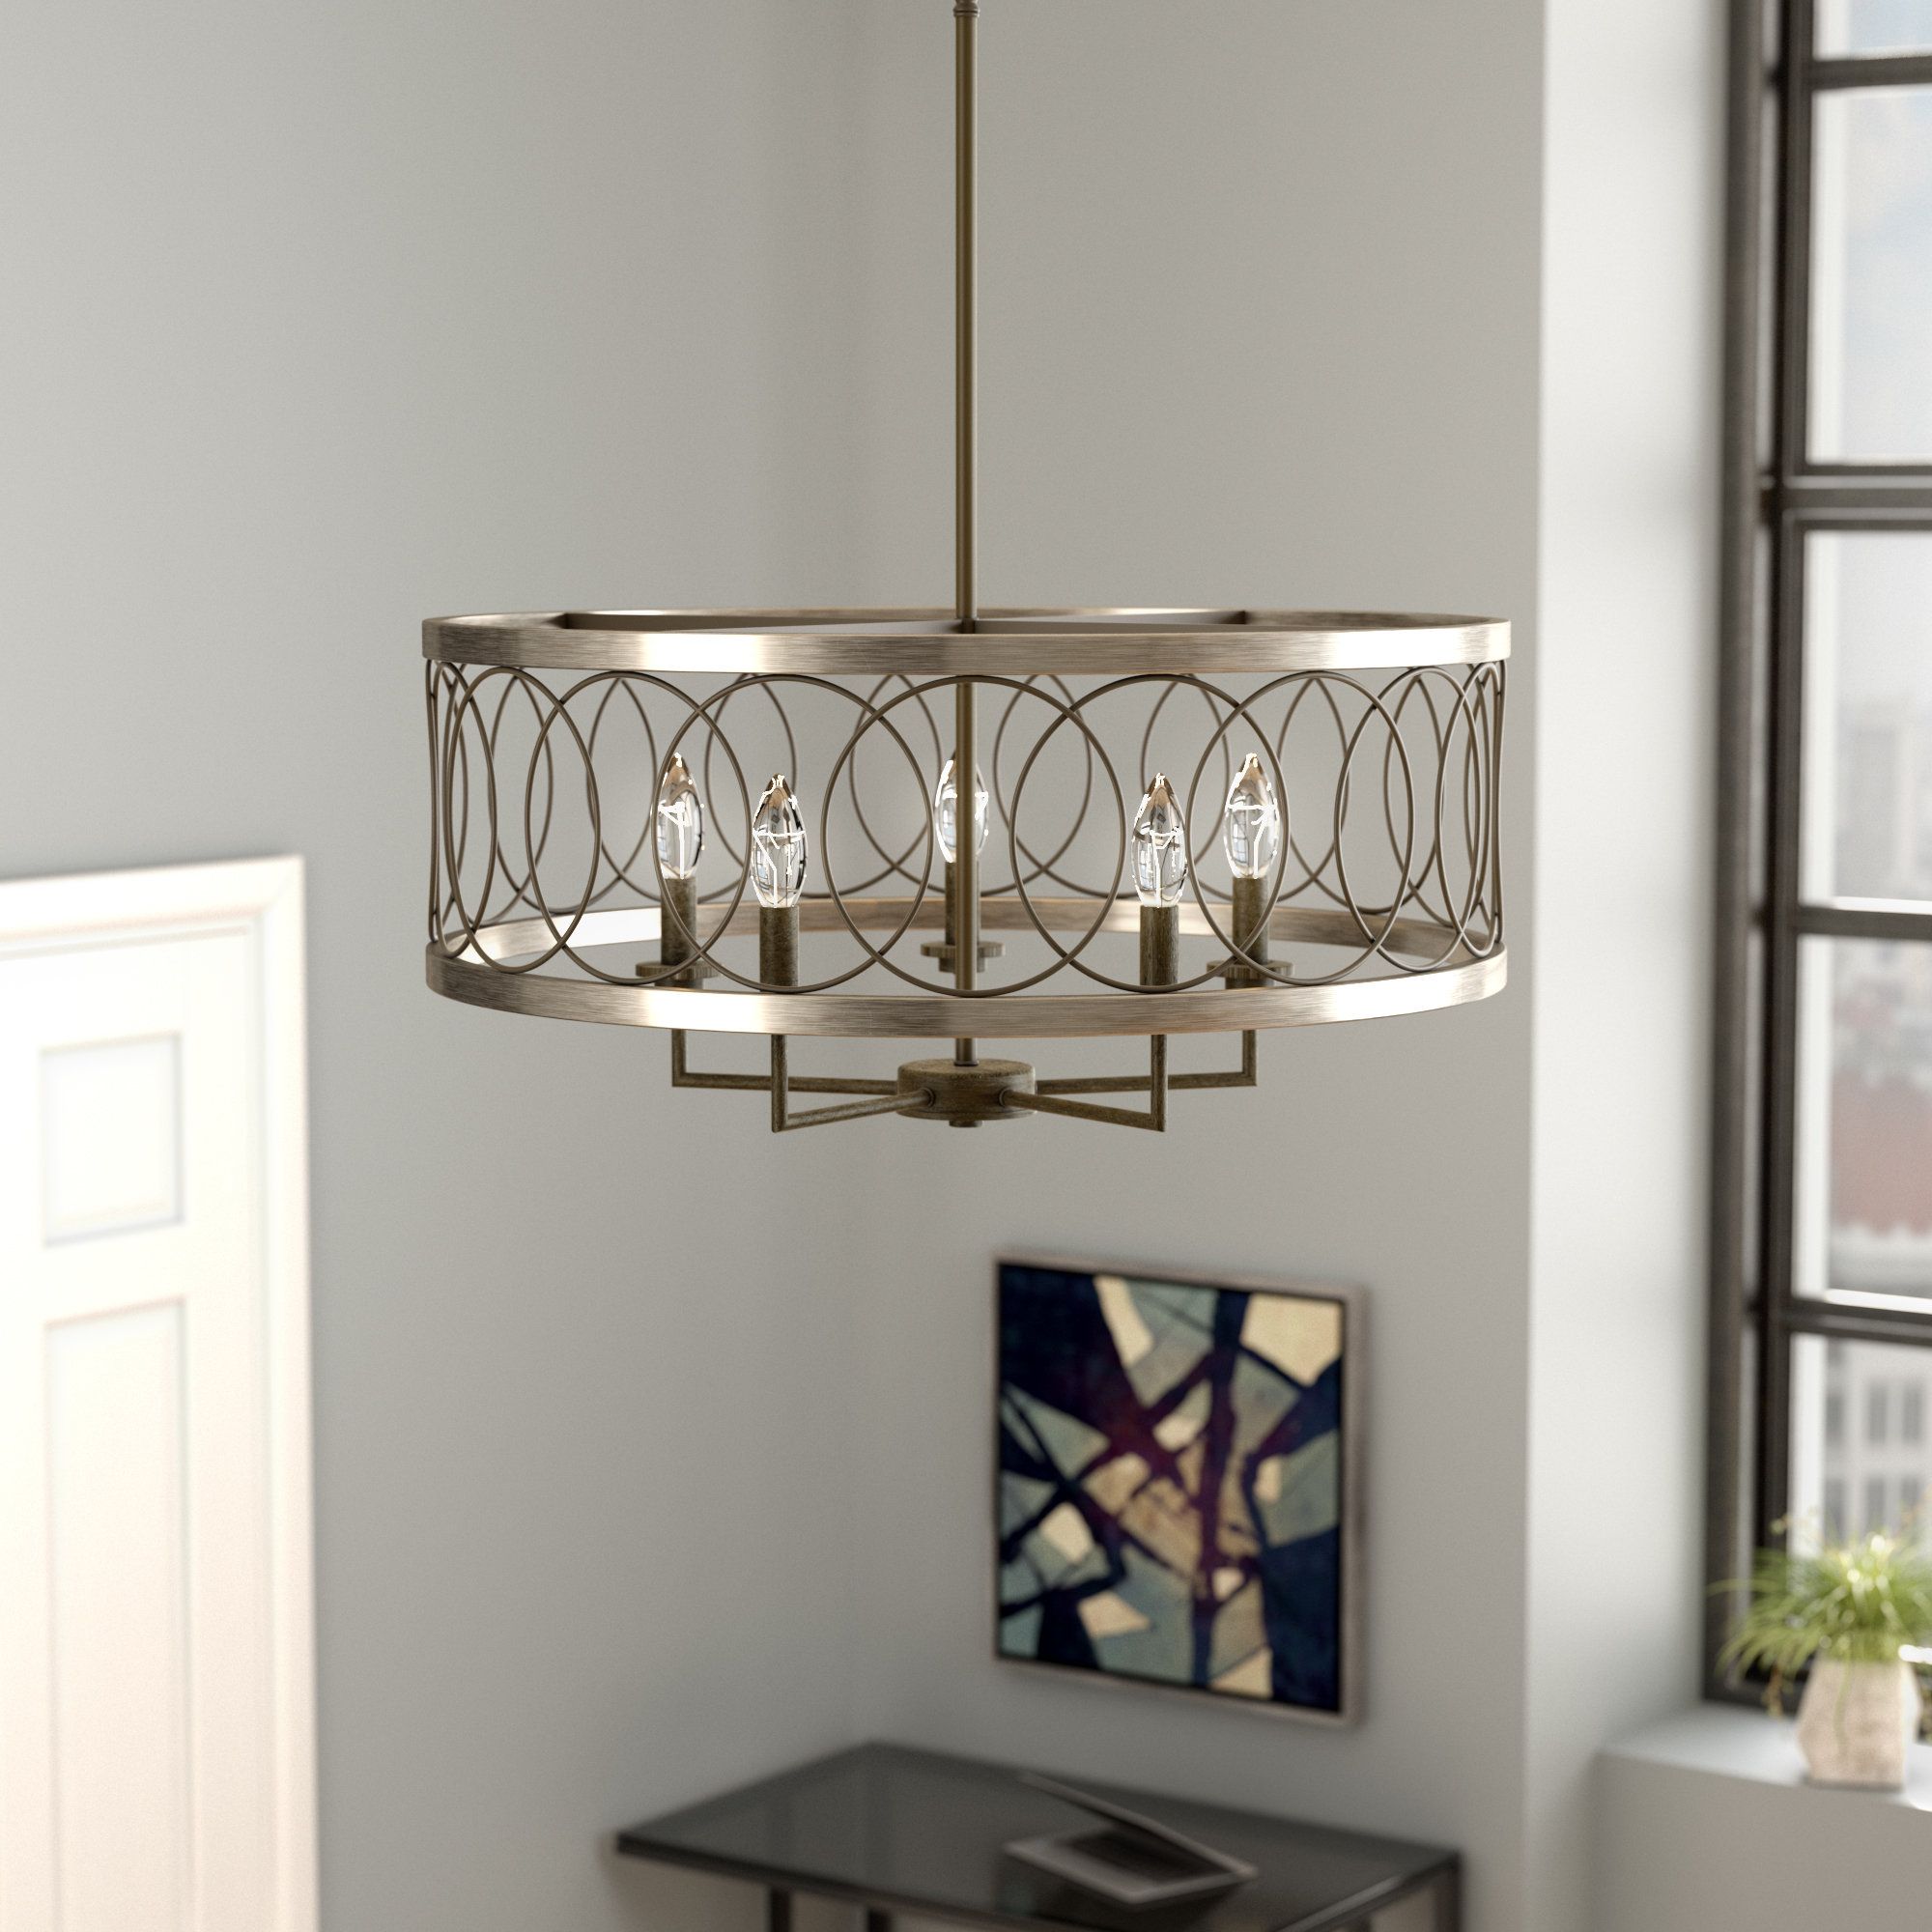 Wayfair Within Buster 5 Light Drum Chandeliers (View 11 of 25)